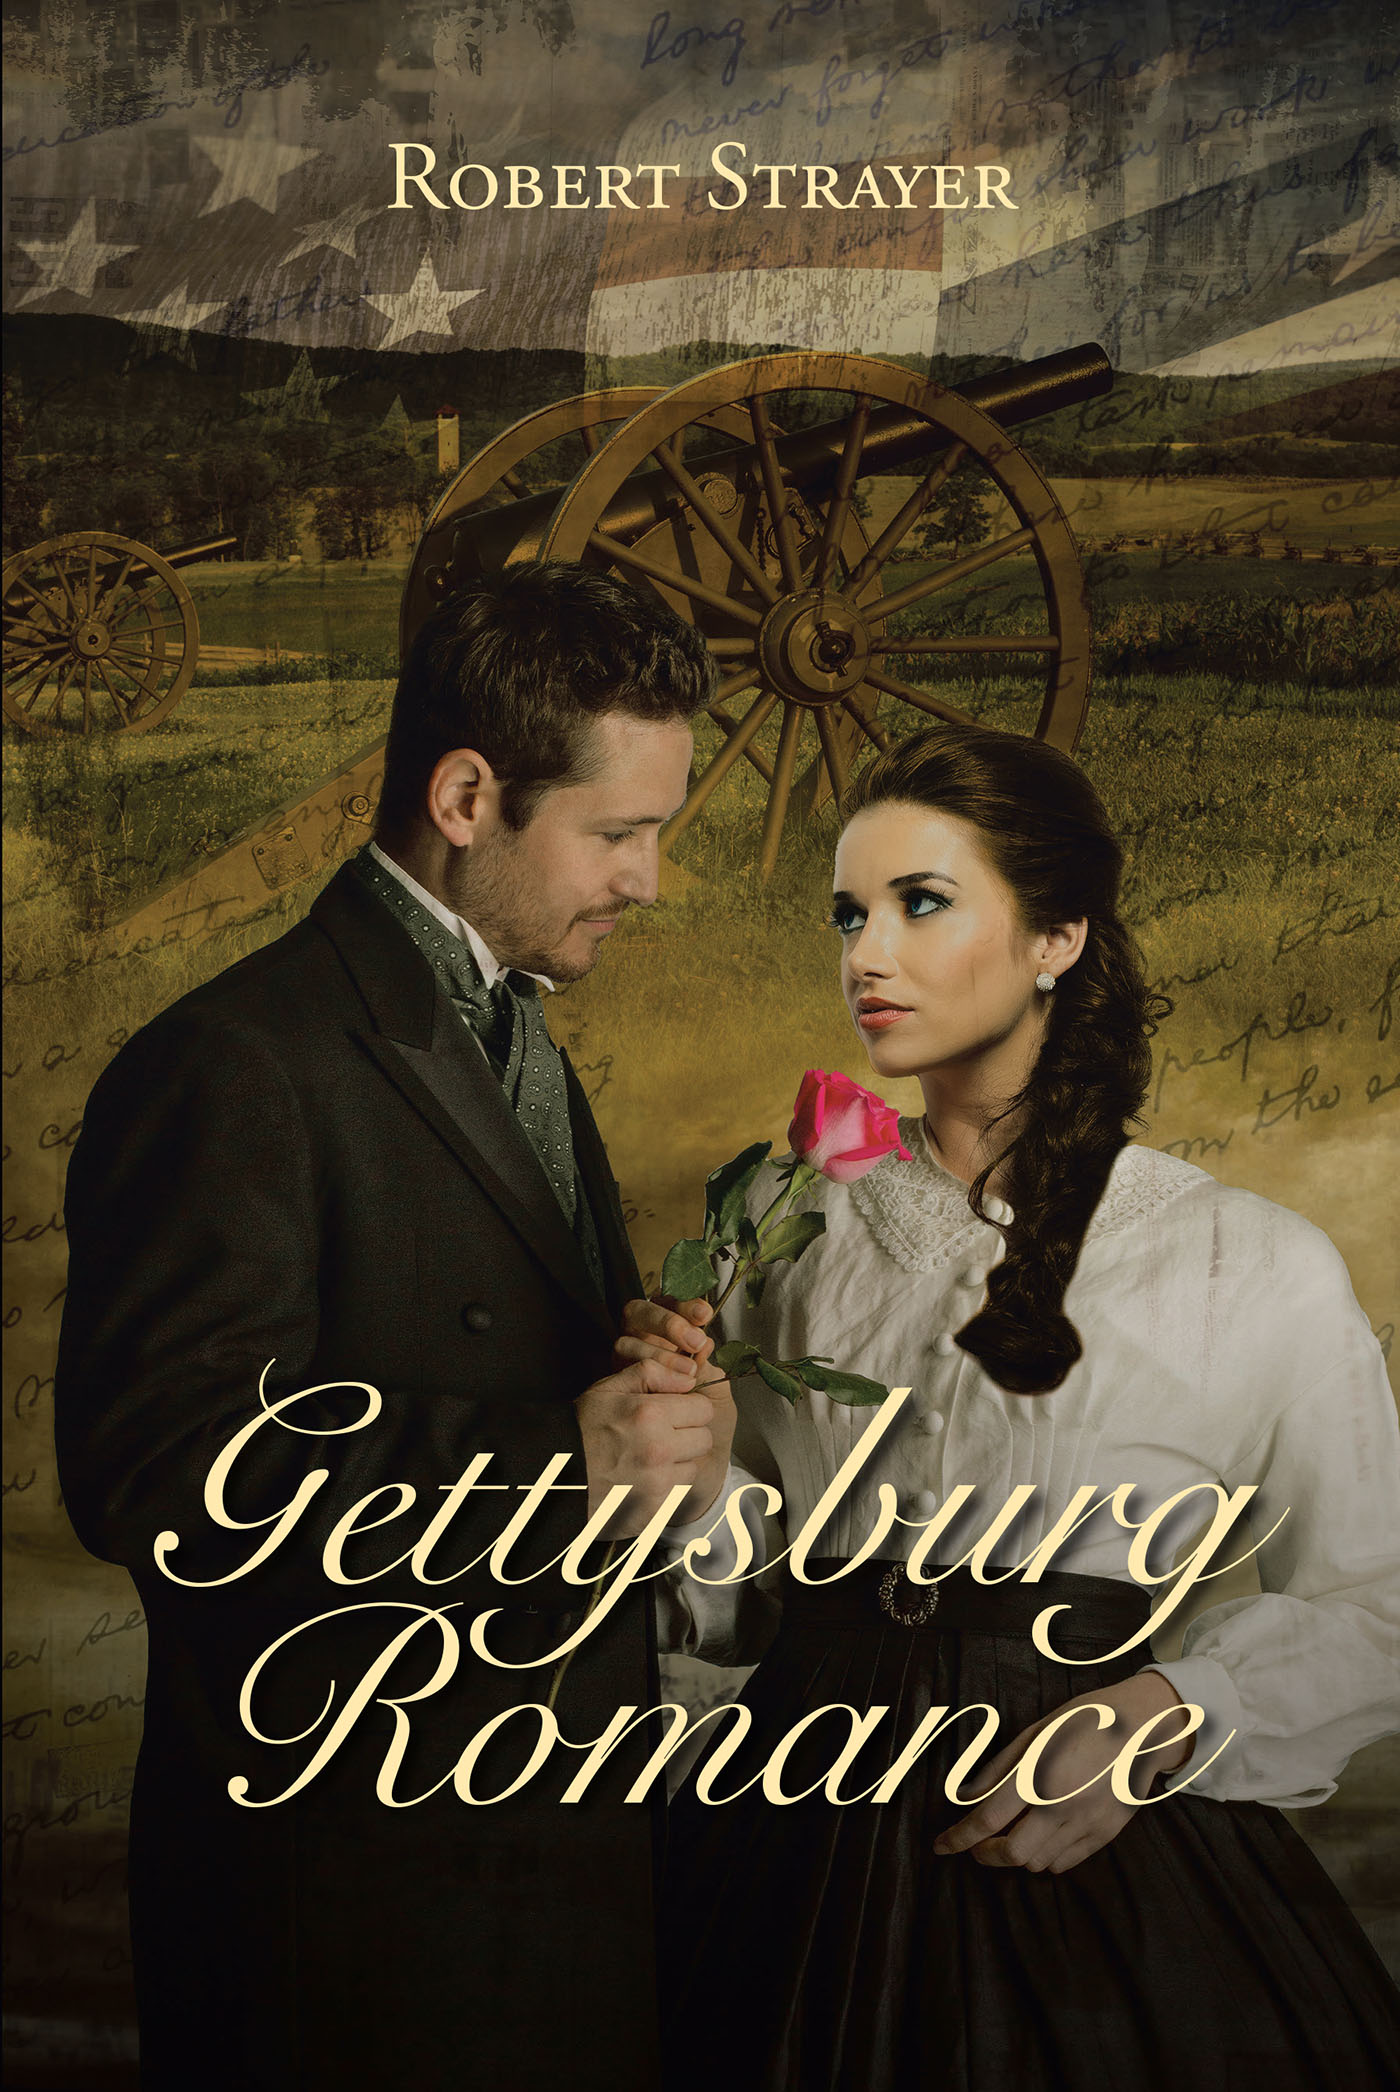 Robert Strayer’s Newly Released "Gettysburg Romance" is a Delightfully Crafted Paranormal Romance That Will Excite the Imagination